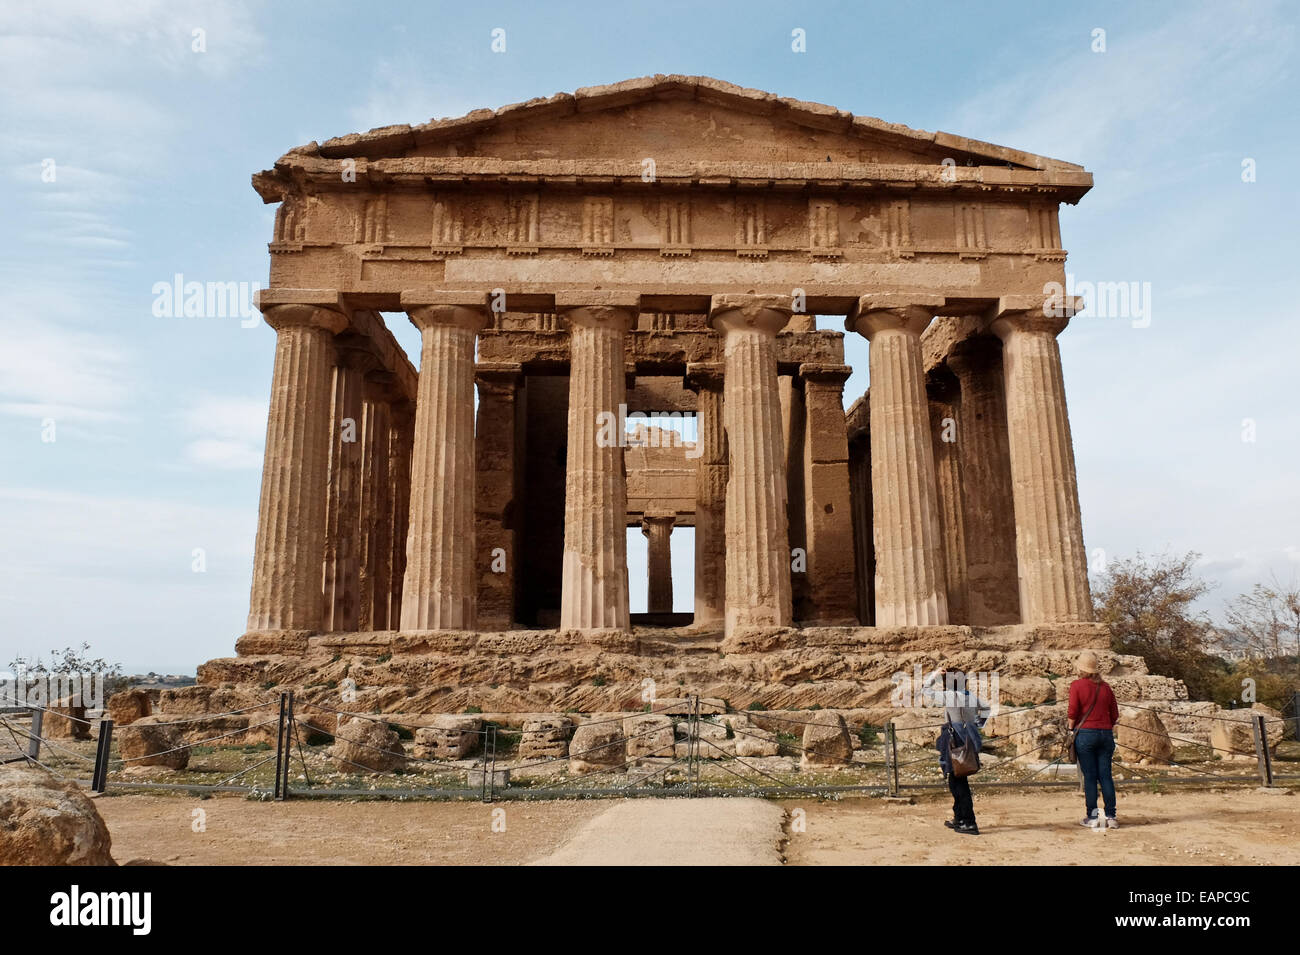 The Valley of the Temples, Valle dei Templi, is an archaeological site near Agrigento included in the UNESCO Heritage Sites list in 1997. With Sicily's fourteen percent unemployment rate, one of the highest in Italy, navigators of the economy look to tourism as a major source of income in the future throughout the island. Stock Photo